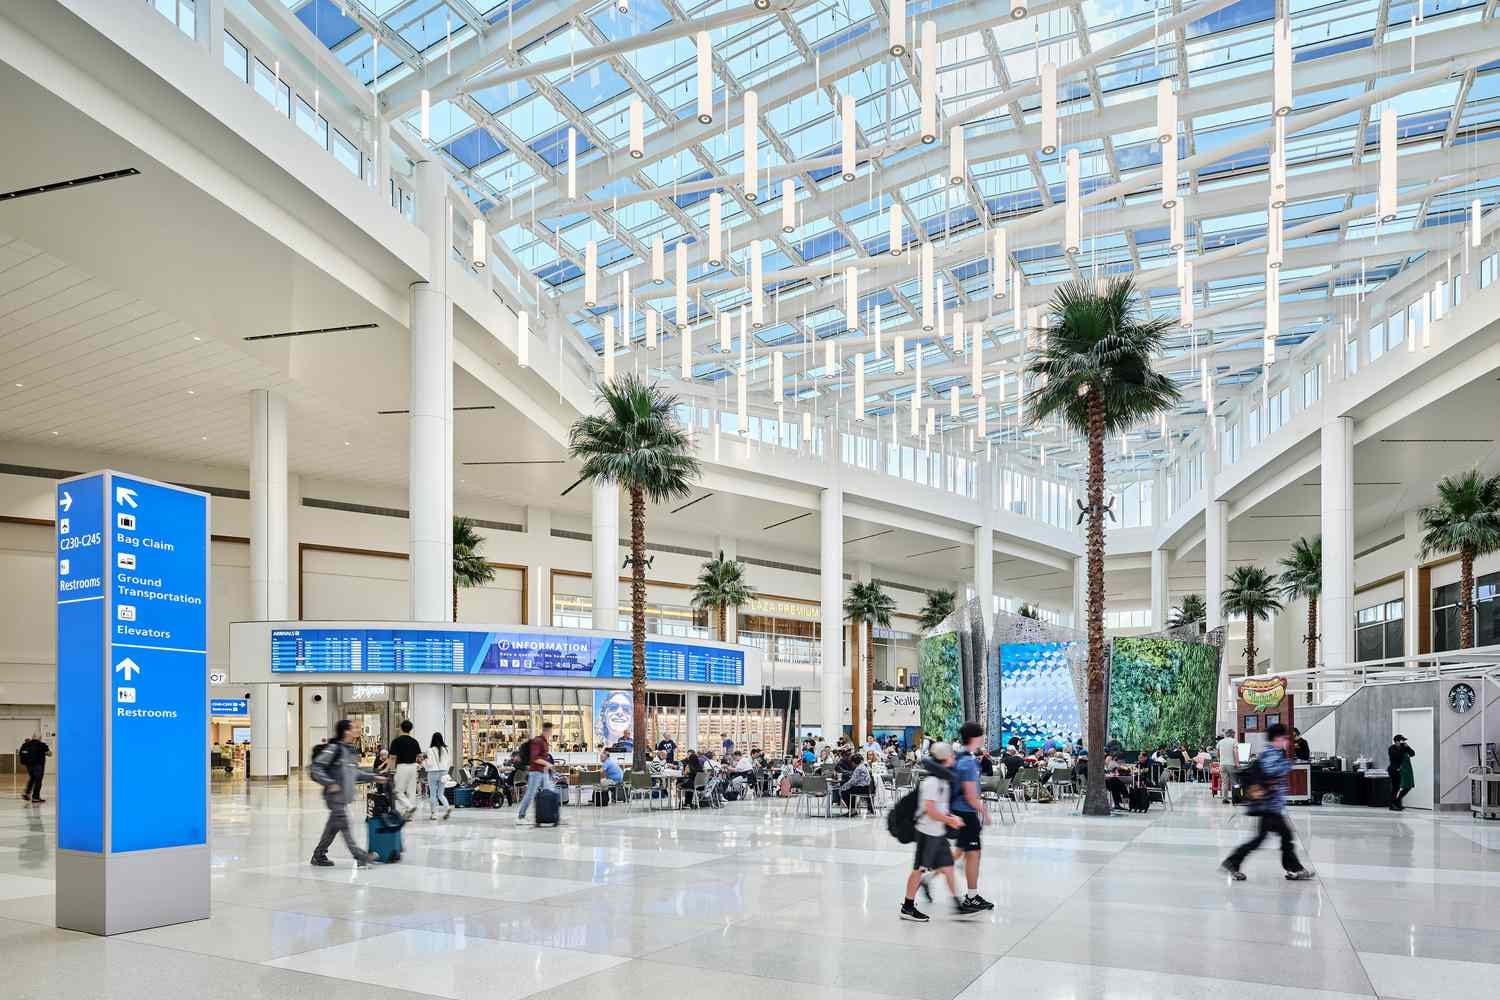 What you can Do at the Orlando Airport-